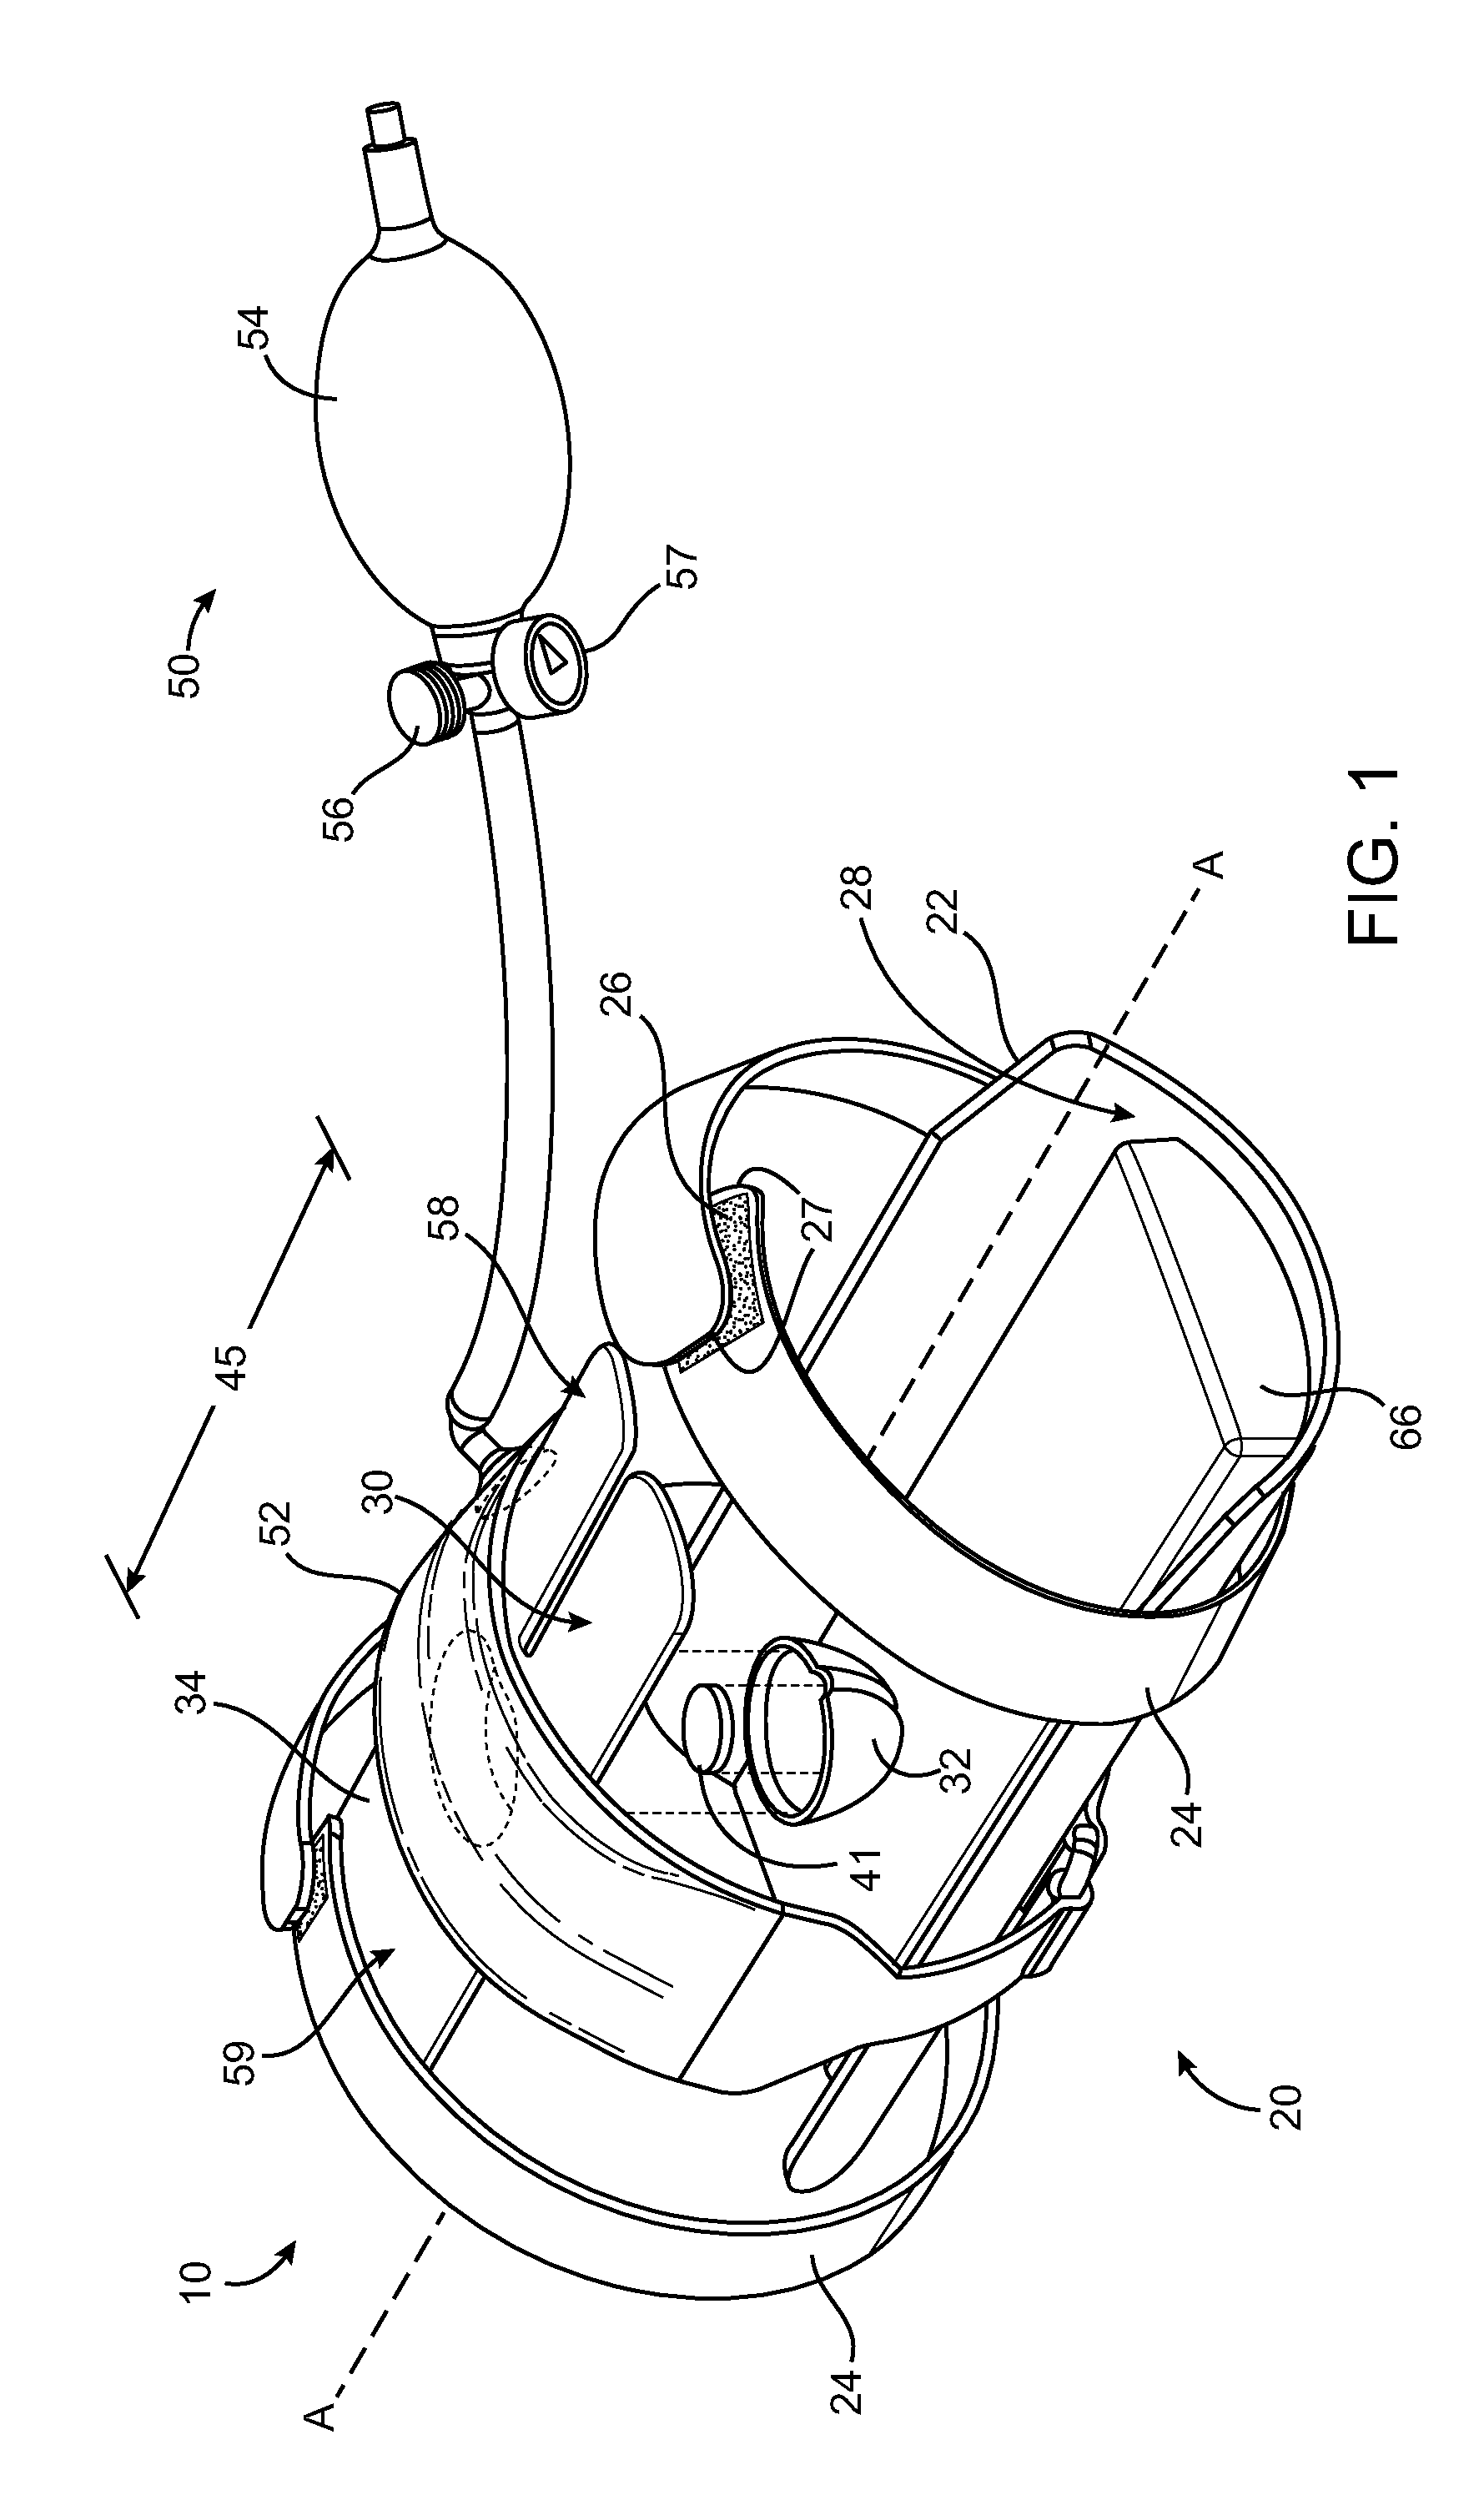 Apparatuses and methods for treating wounds